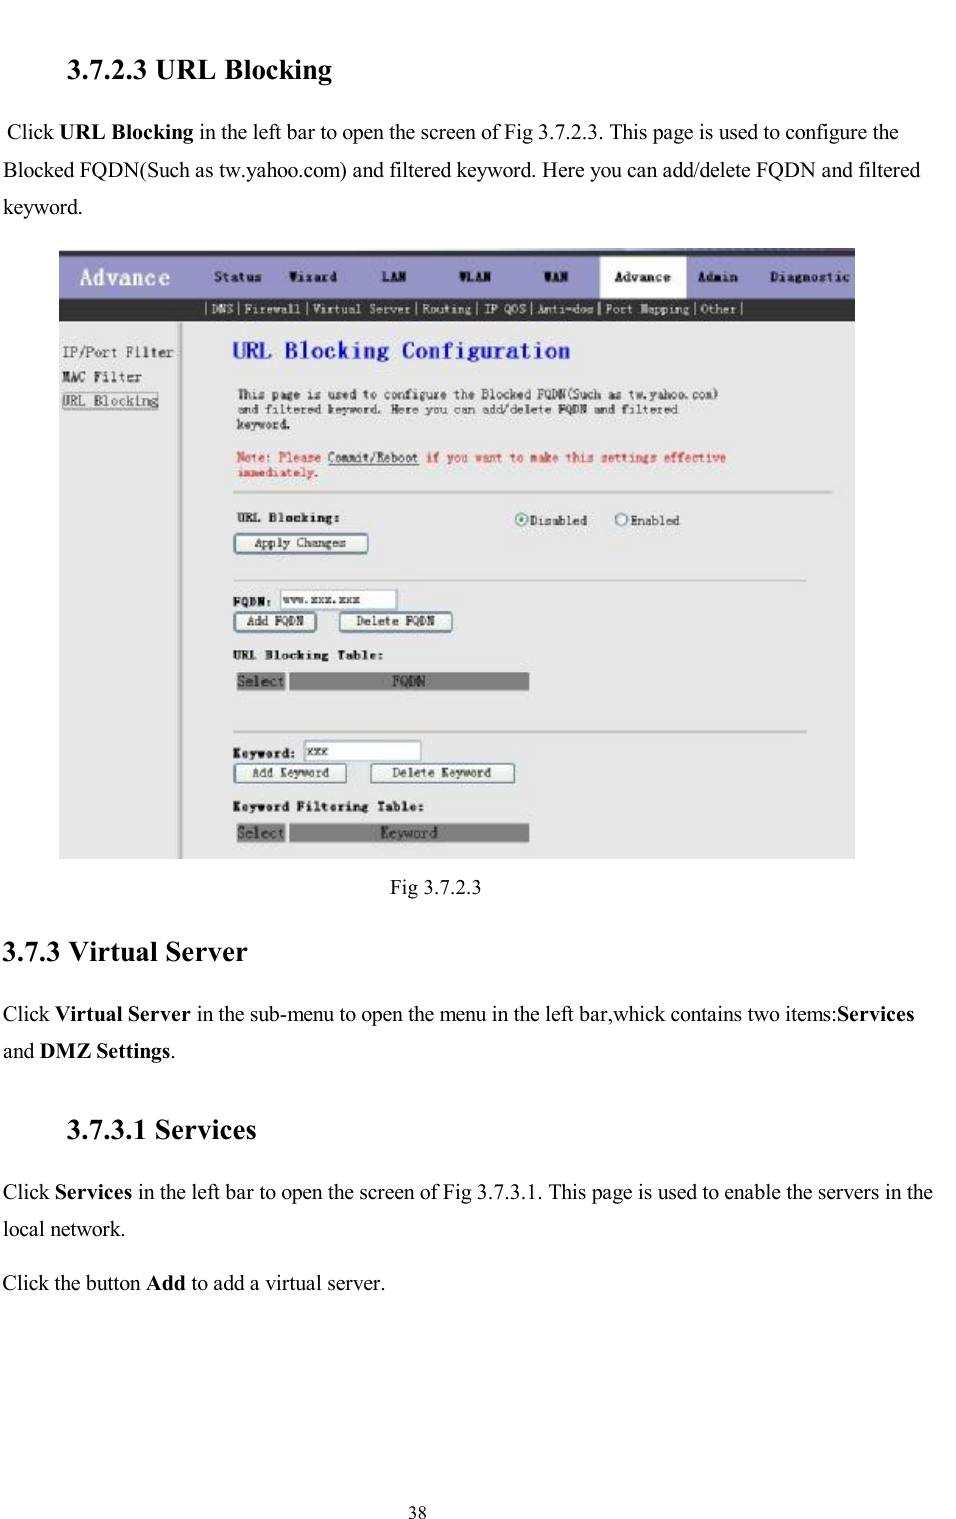                                                                     38  3.7.2.3 URL Blocking Click URL Blocking in the left bar to open the screen of Fig 3.7.2.3. This page is used to configure the Blocked FQDN(Such as tw.yahoo.com) and filtered keyword. Here you can add/delete FQDN and filtered keyword.  Fig 3.7.2.3 3.7.3 Virtual Server Click Virtual Server in the sub-menu to open the menu in the left bar,whick contains two items:Services and DMZ Settings.  3.7.3.1 Services Click Services in the left bar to open the screen of Fig 3.7.3.1. This page is used to enable the servers in the local network. Click the button Add to add a virtual server. 